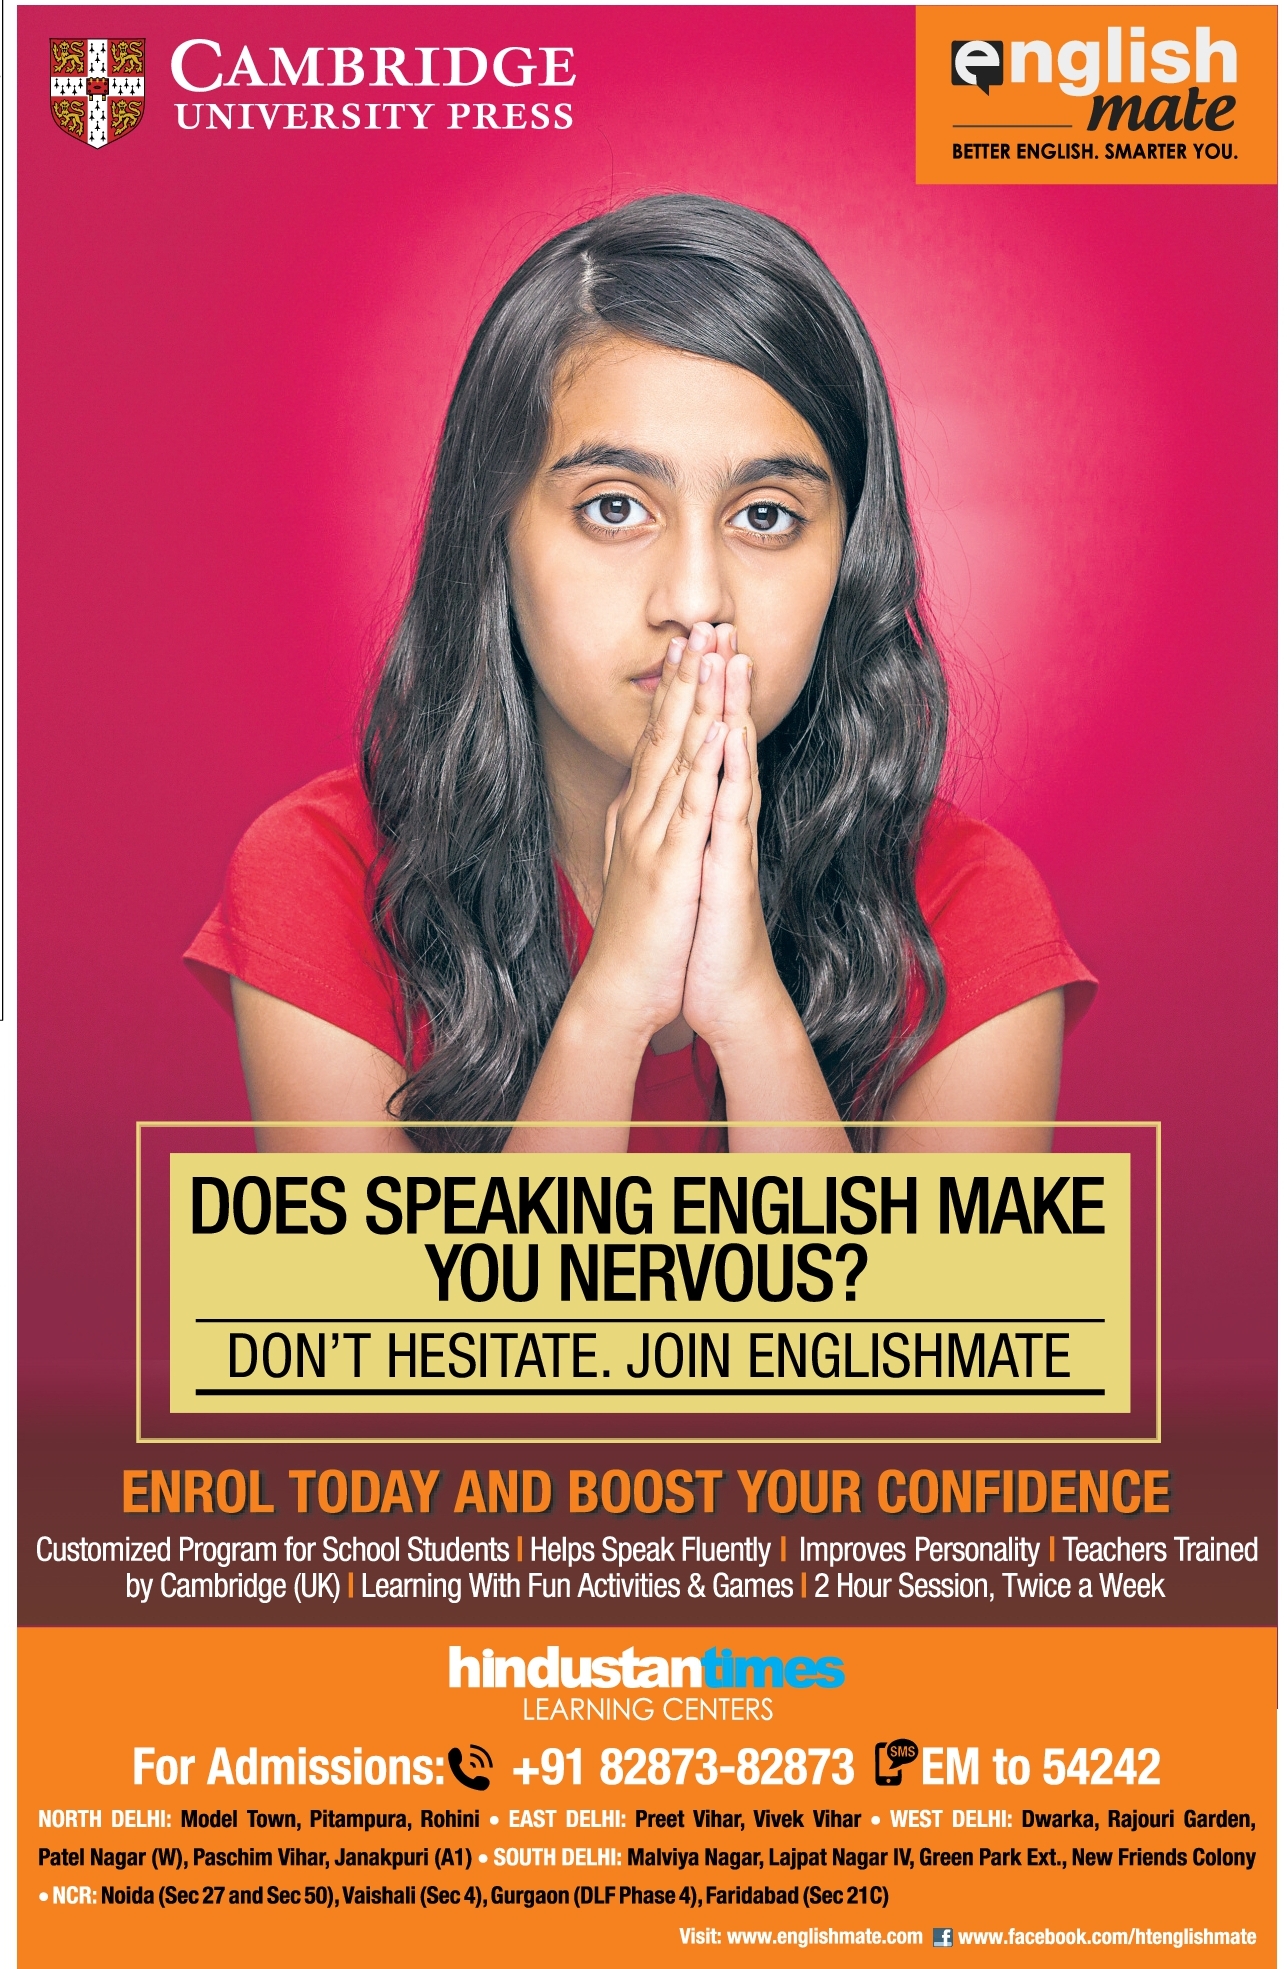 english-mate-cambridge-university-press-enroll-today-and-boost-your-confidence-ad-advert-gallery